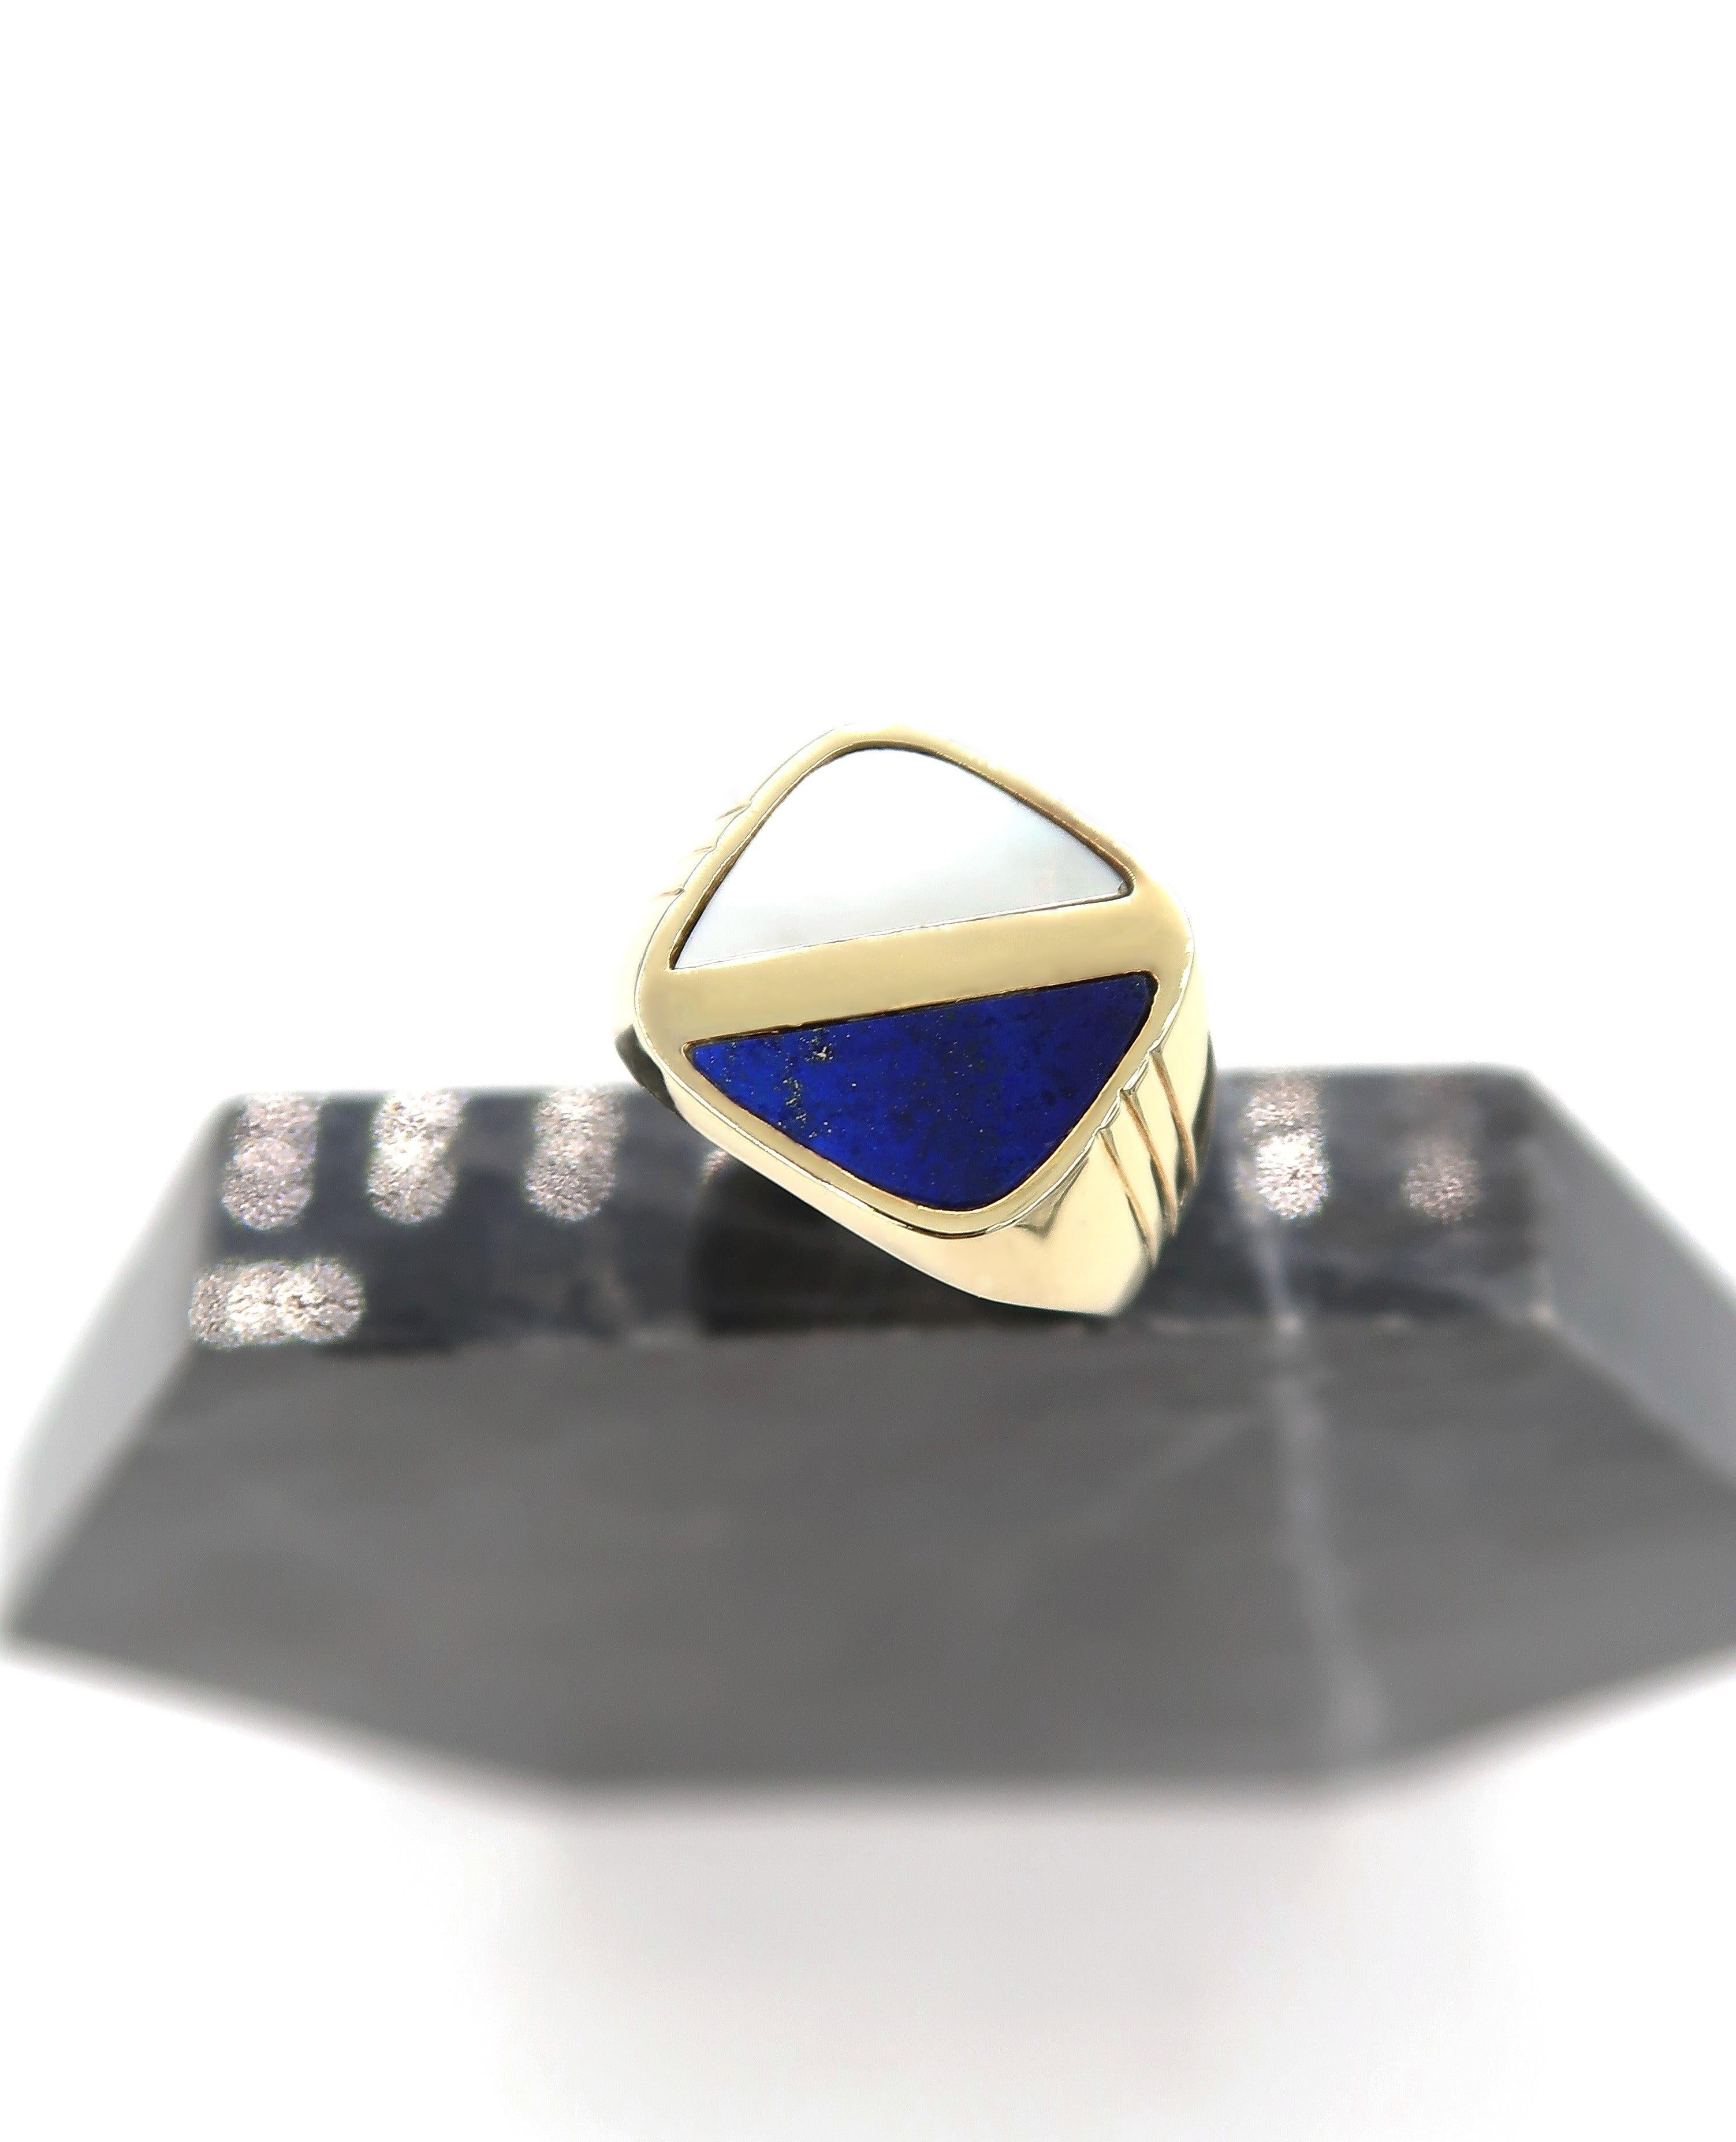 Lapis Lazuli and Mother of Pearl Rounded Square Mens Signet Ring in 14 Karat Yellow Gold

Please let us know should you wish to have the ring resized or engraved. 

Ring Size: US 9.5 / UK S

Gold: 14K, 5.61 g
Mother of Pearl: 1 piece
Lapis Lazuli: 1